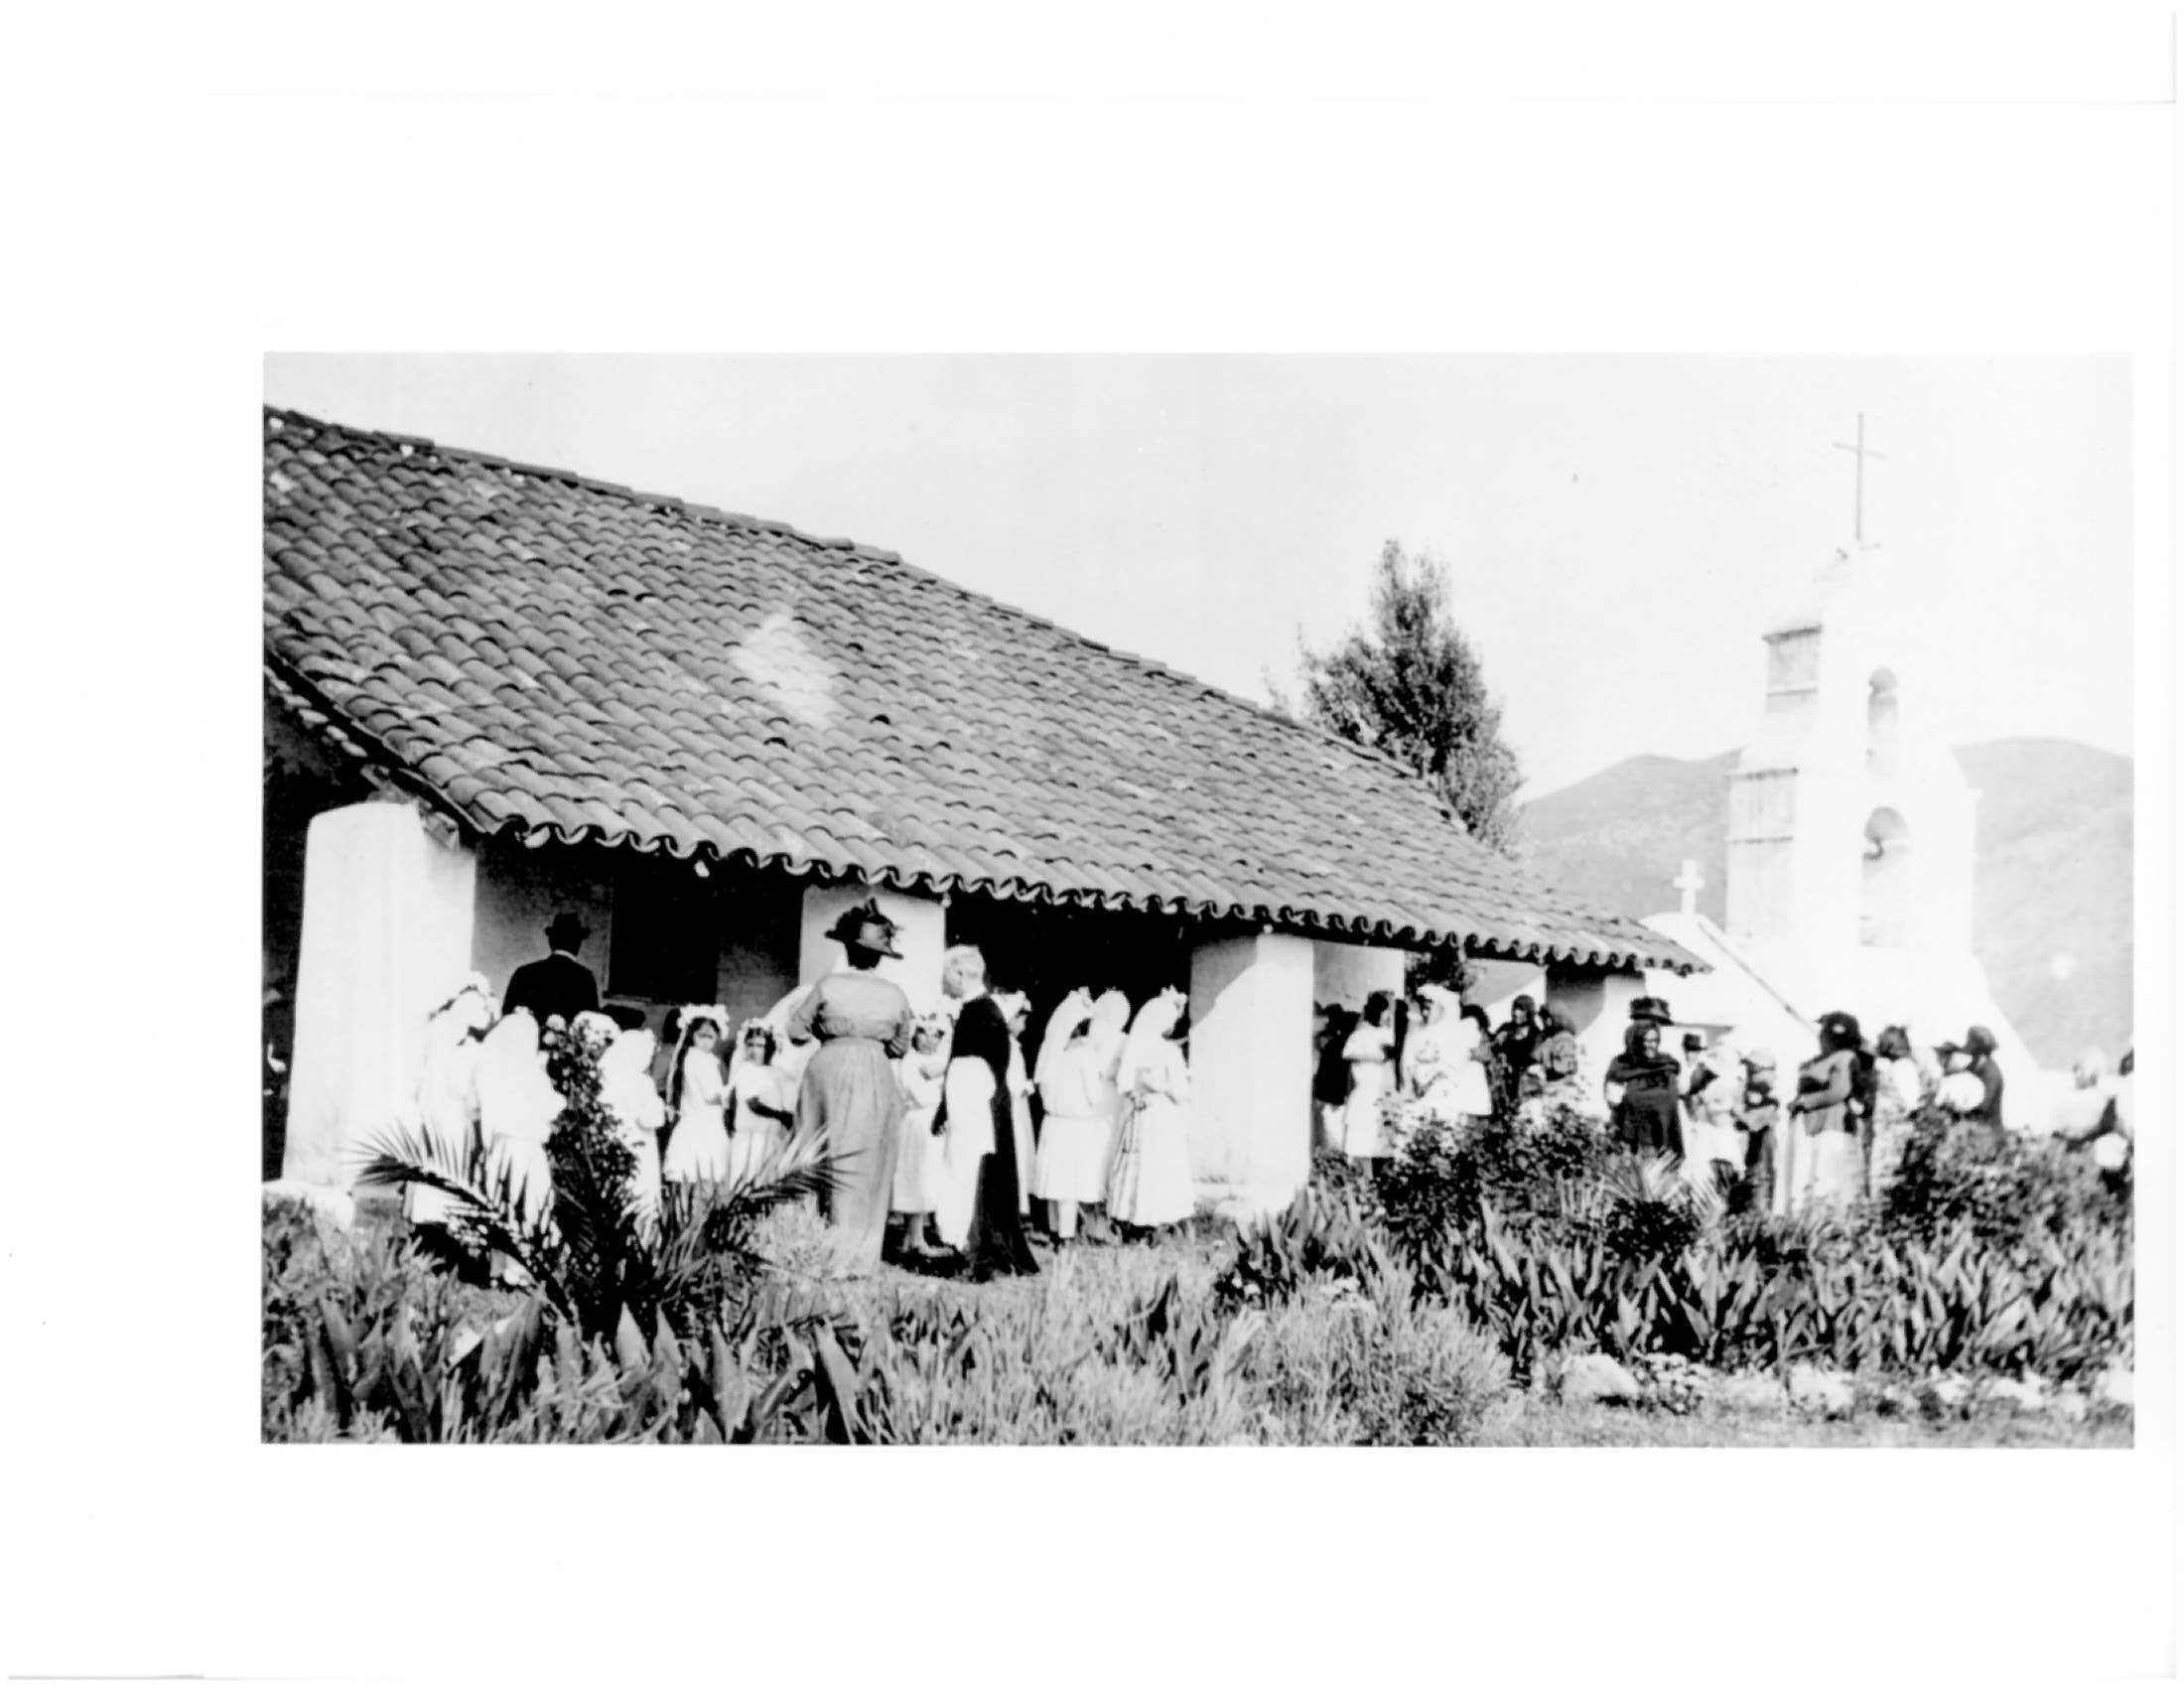 Old photograph of people in white dresses and other finery in front of tile-roofed adobe surrounded by agave plants with belfry in background